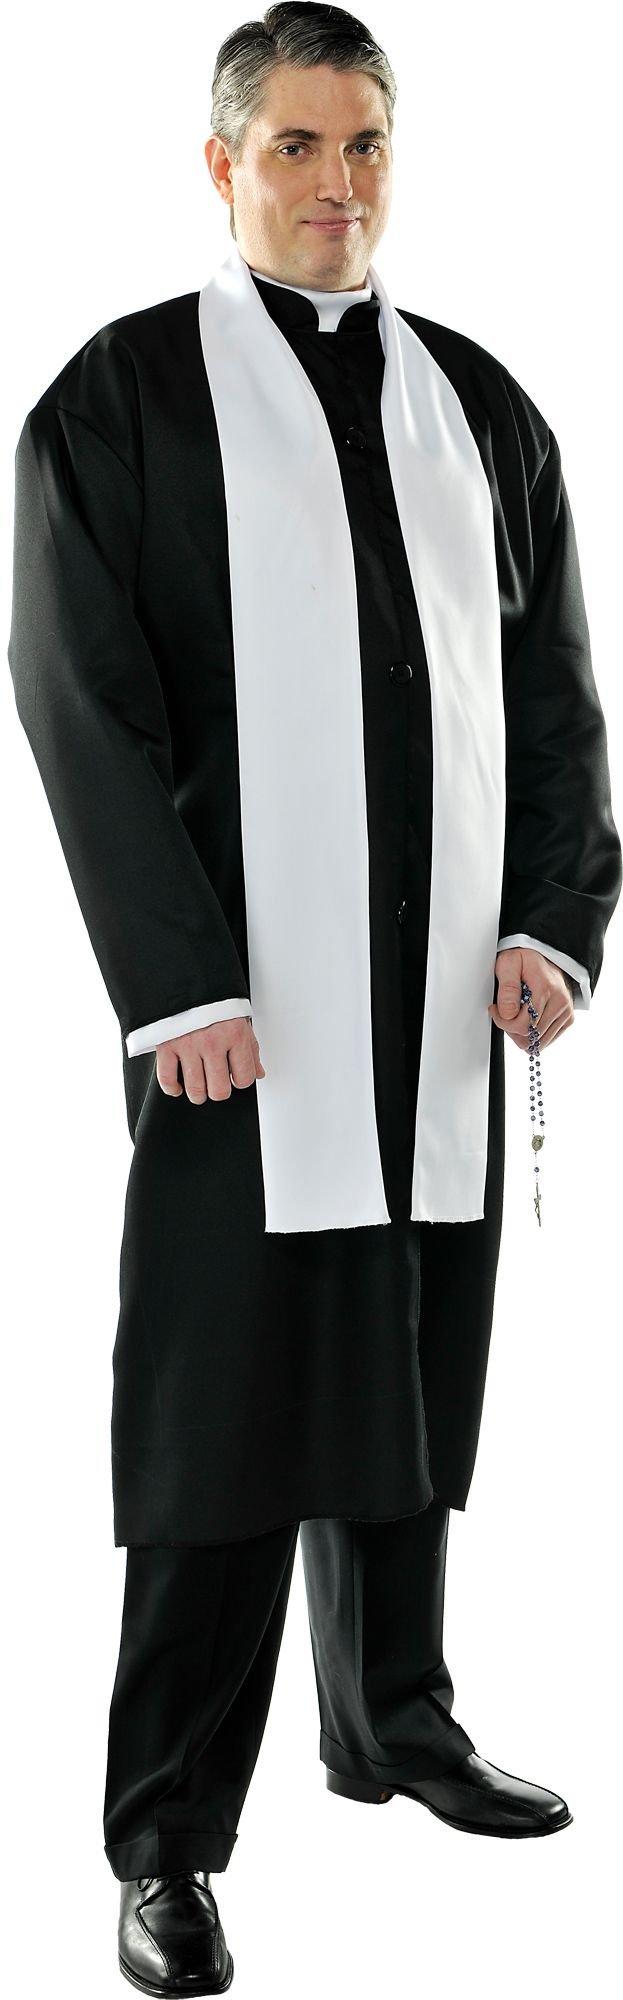 Adult Plus Size Father Priest Costume